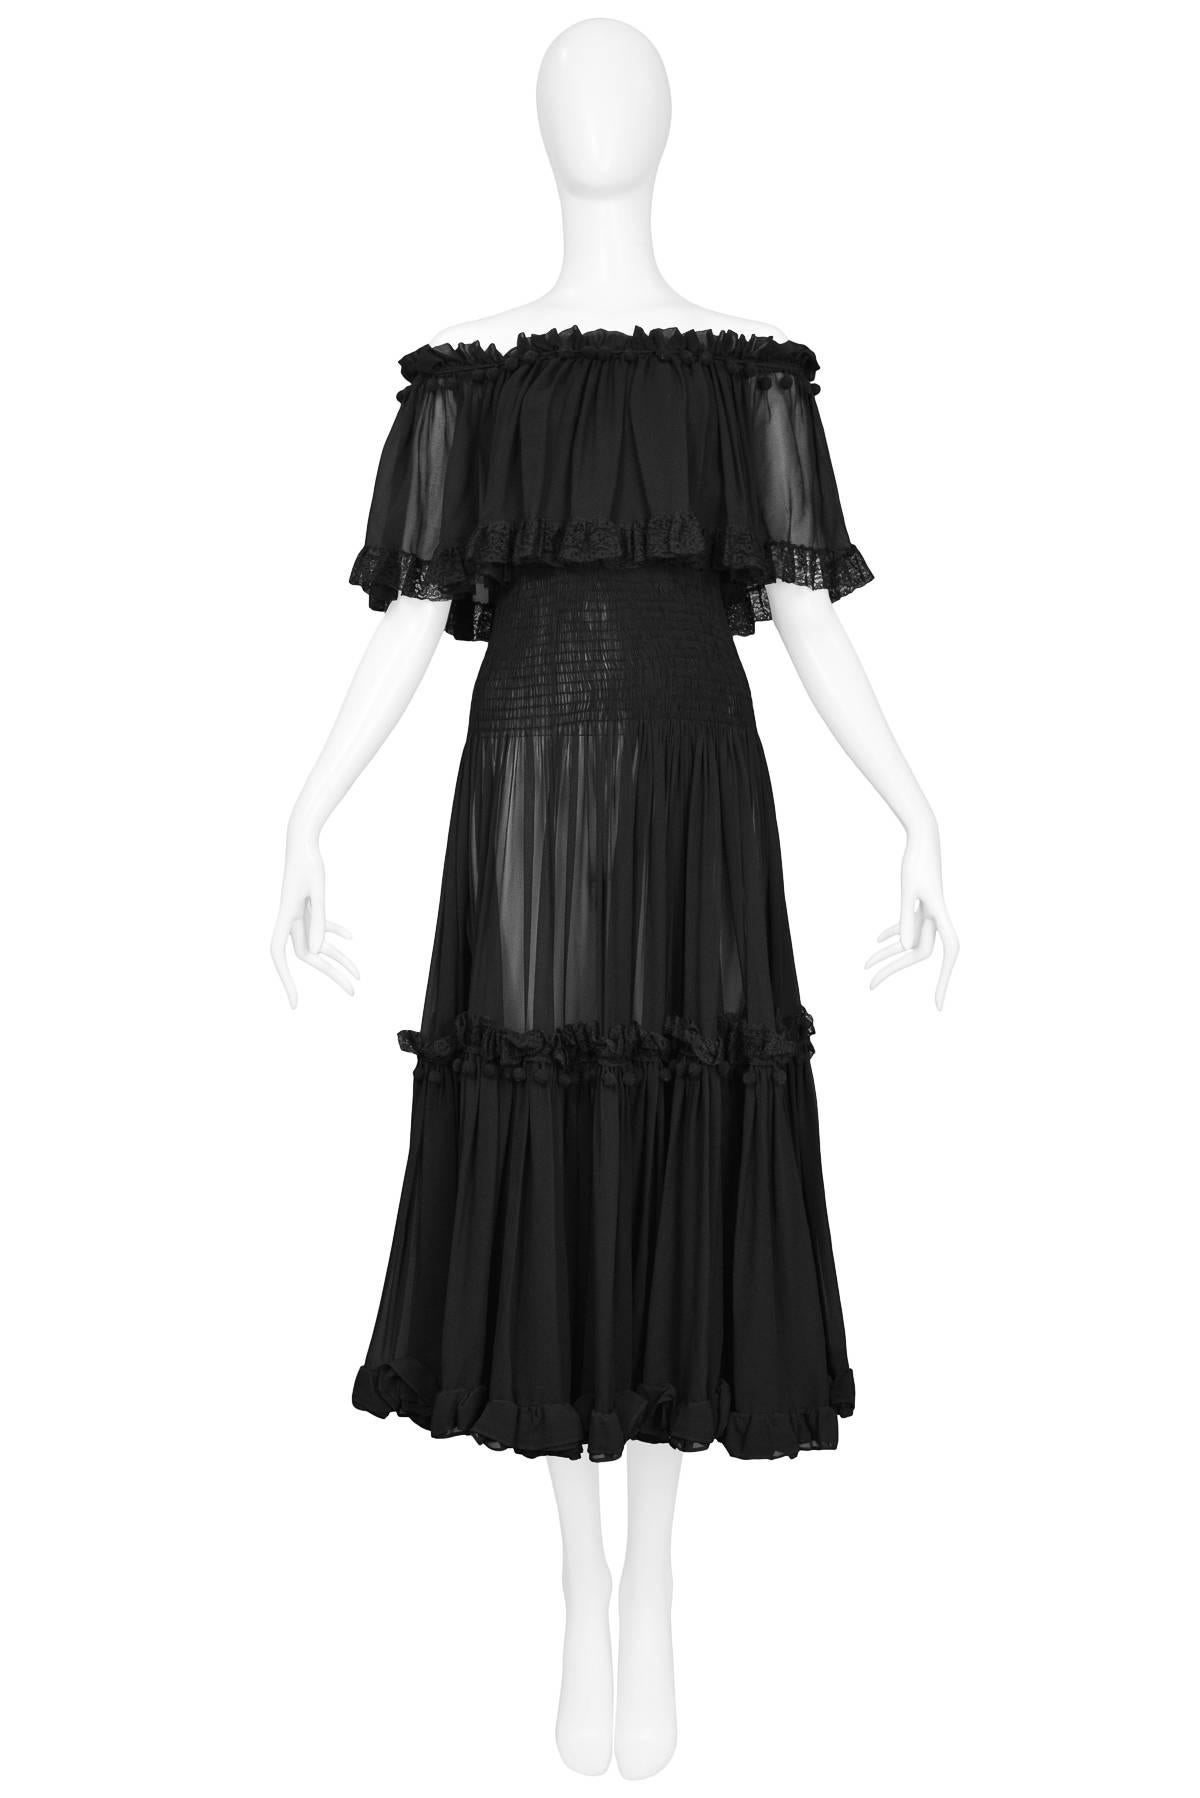 Vintage 1970s Yves Saint Laurent black off the shoulder tiered gypsy dress featuring a smocked bodice and adorned with lace & pom poms.

Excellent Condition.

Size: 36/38